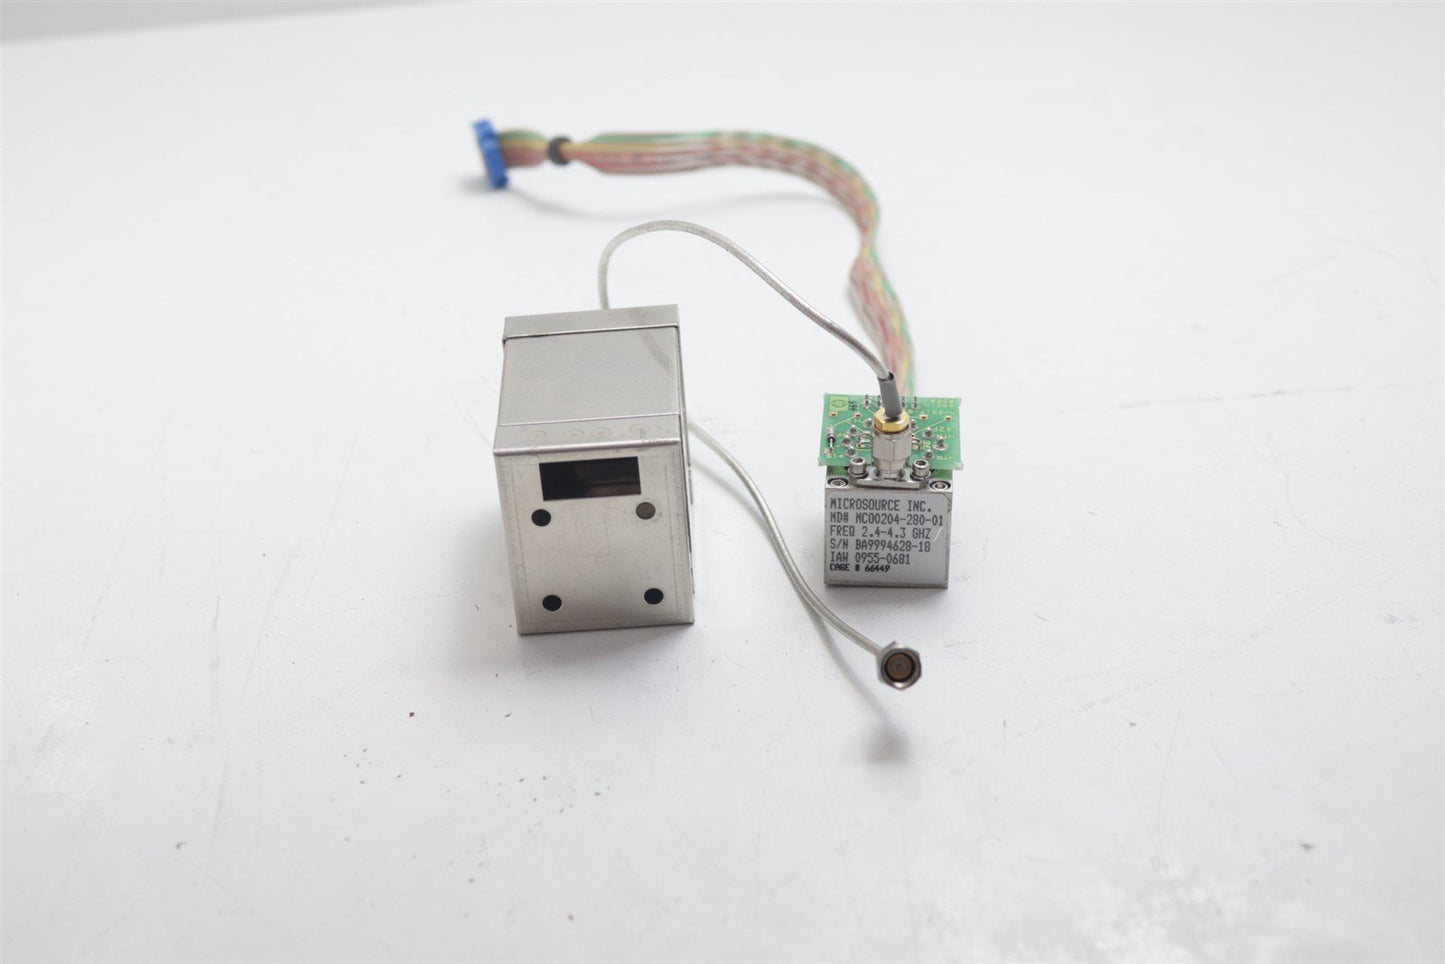 Microsource 0955-0681 MCO0204-280-01 Noncrystal Oscillator 2.4- 4.3 GHz and Cage